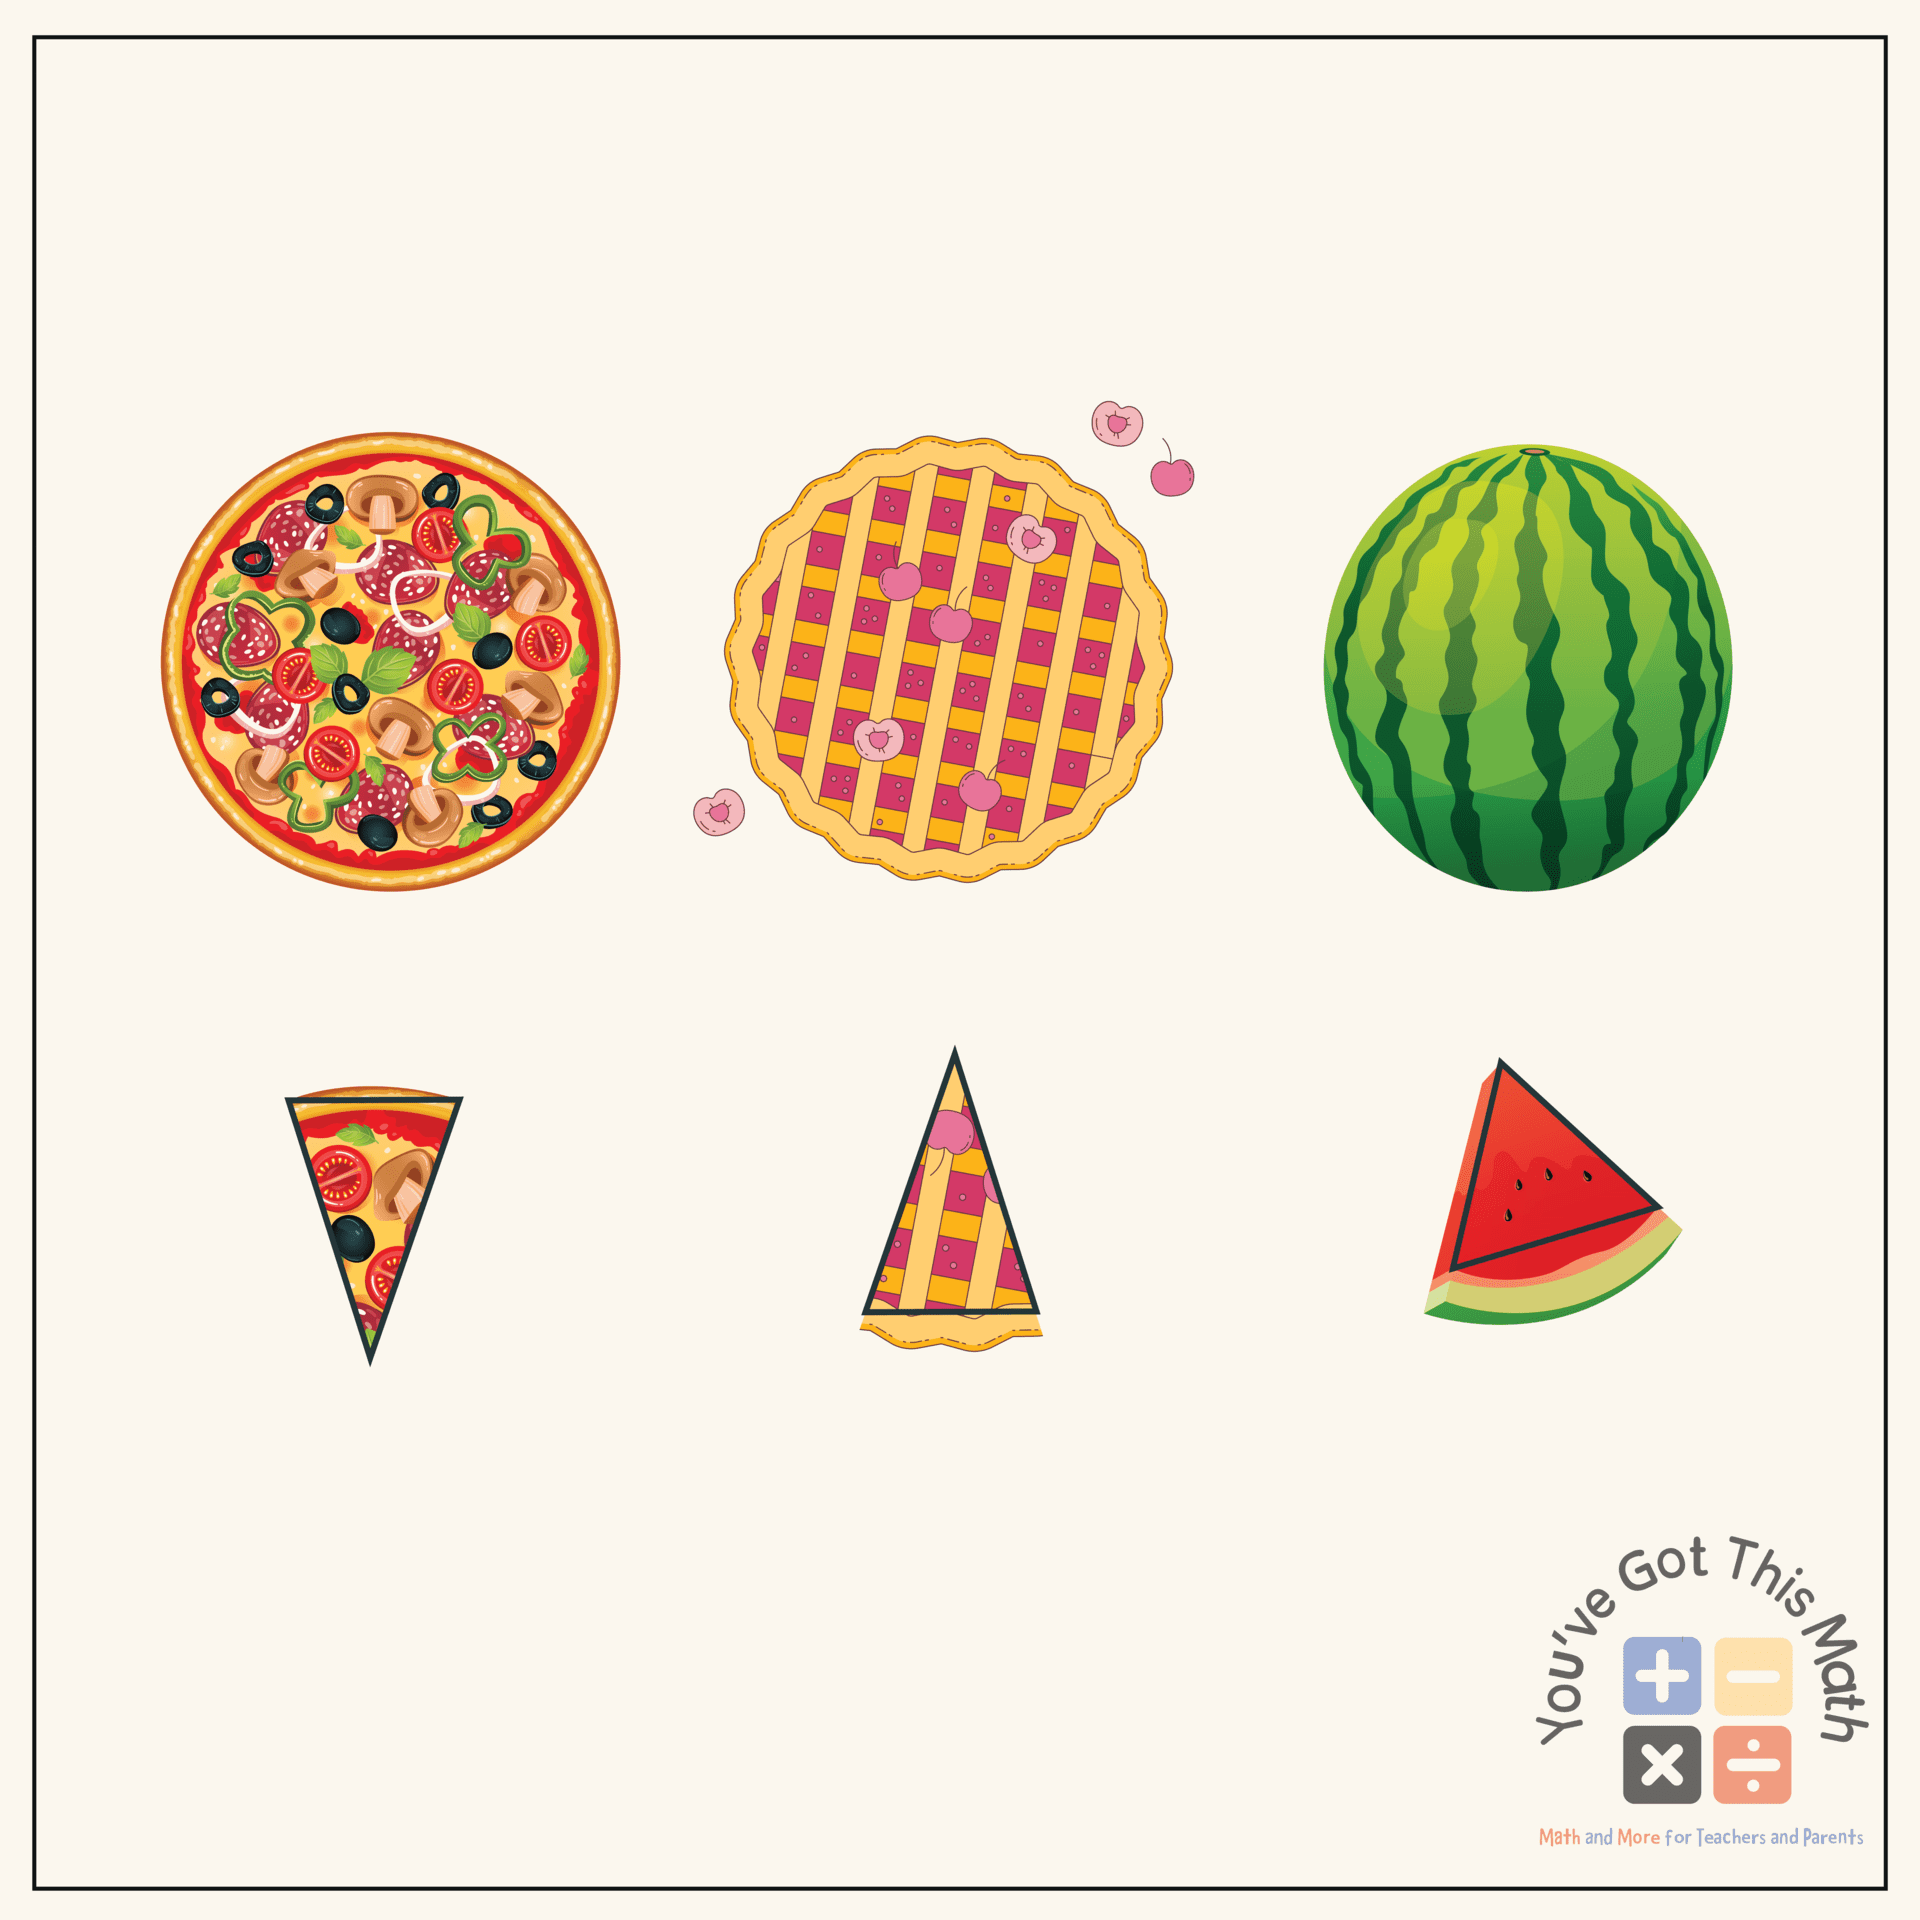 Slices of Pizza Pie and Watermelon in Shape of Isosceles Triangle